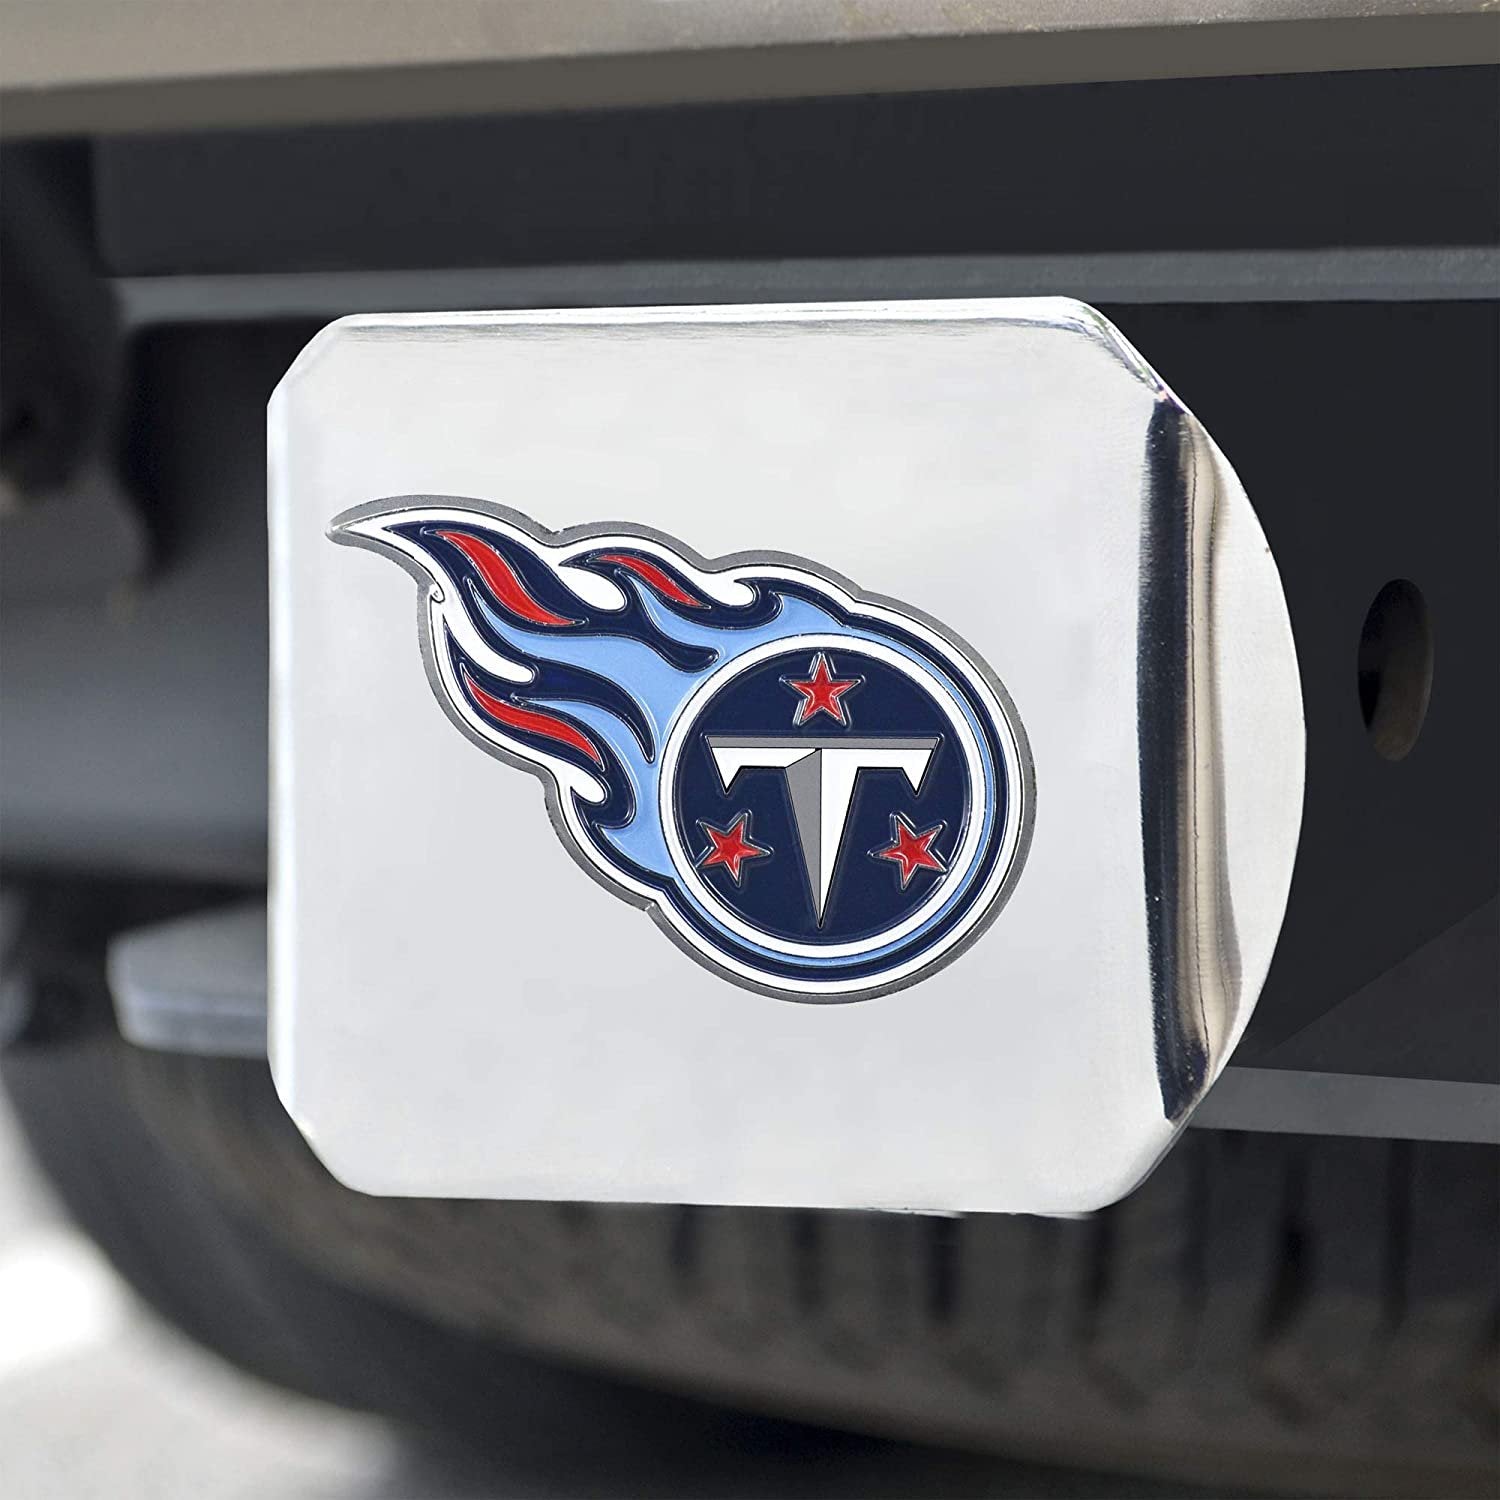 Tennessee Titans Hitch Cover Solid Metal with Raised Color Metal Emblem 2" Square Type III